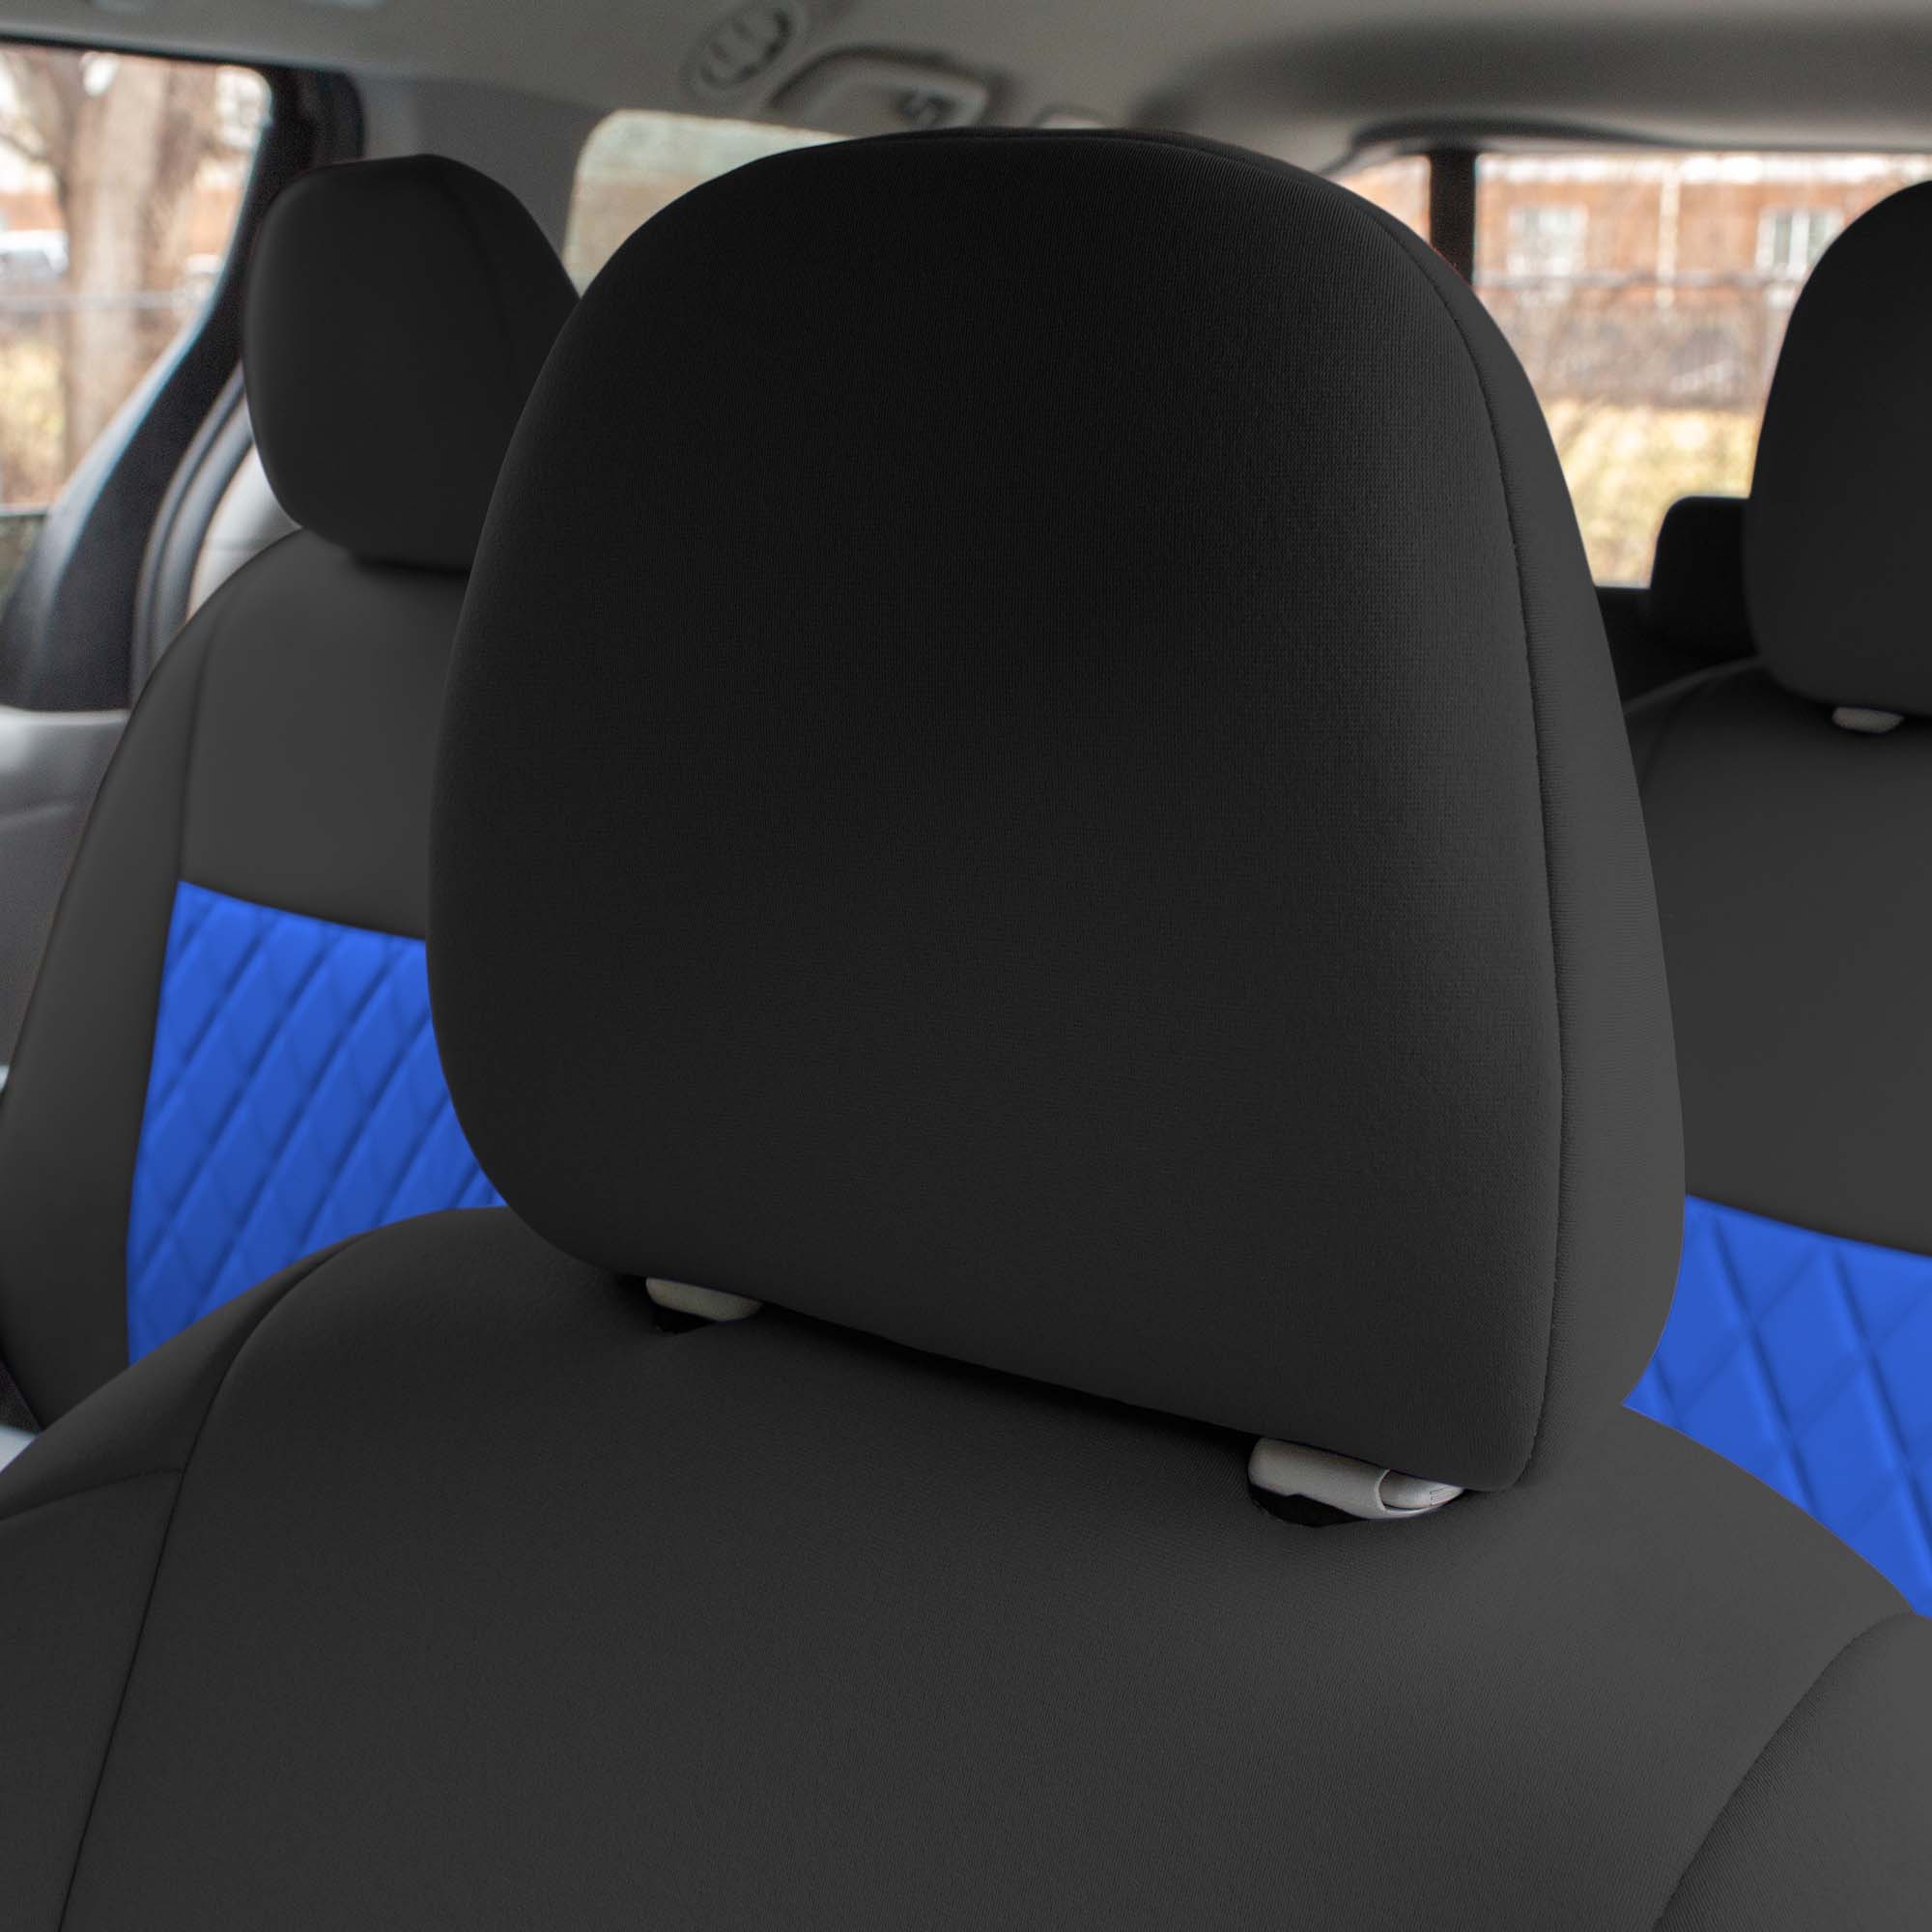 FH Group Custom Fit Car Seat Covers for Toyota Sienna 2011-2020, Car Seat  Cover Full Set, Automotive Seat Covers in COLOR Neoprene, Waterproof and  Washable Seat Covers Blue/Black